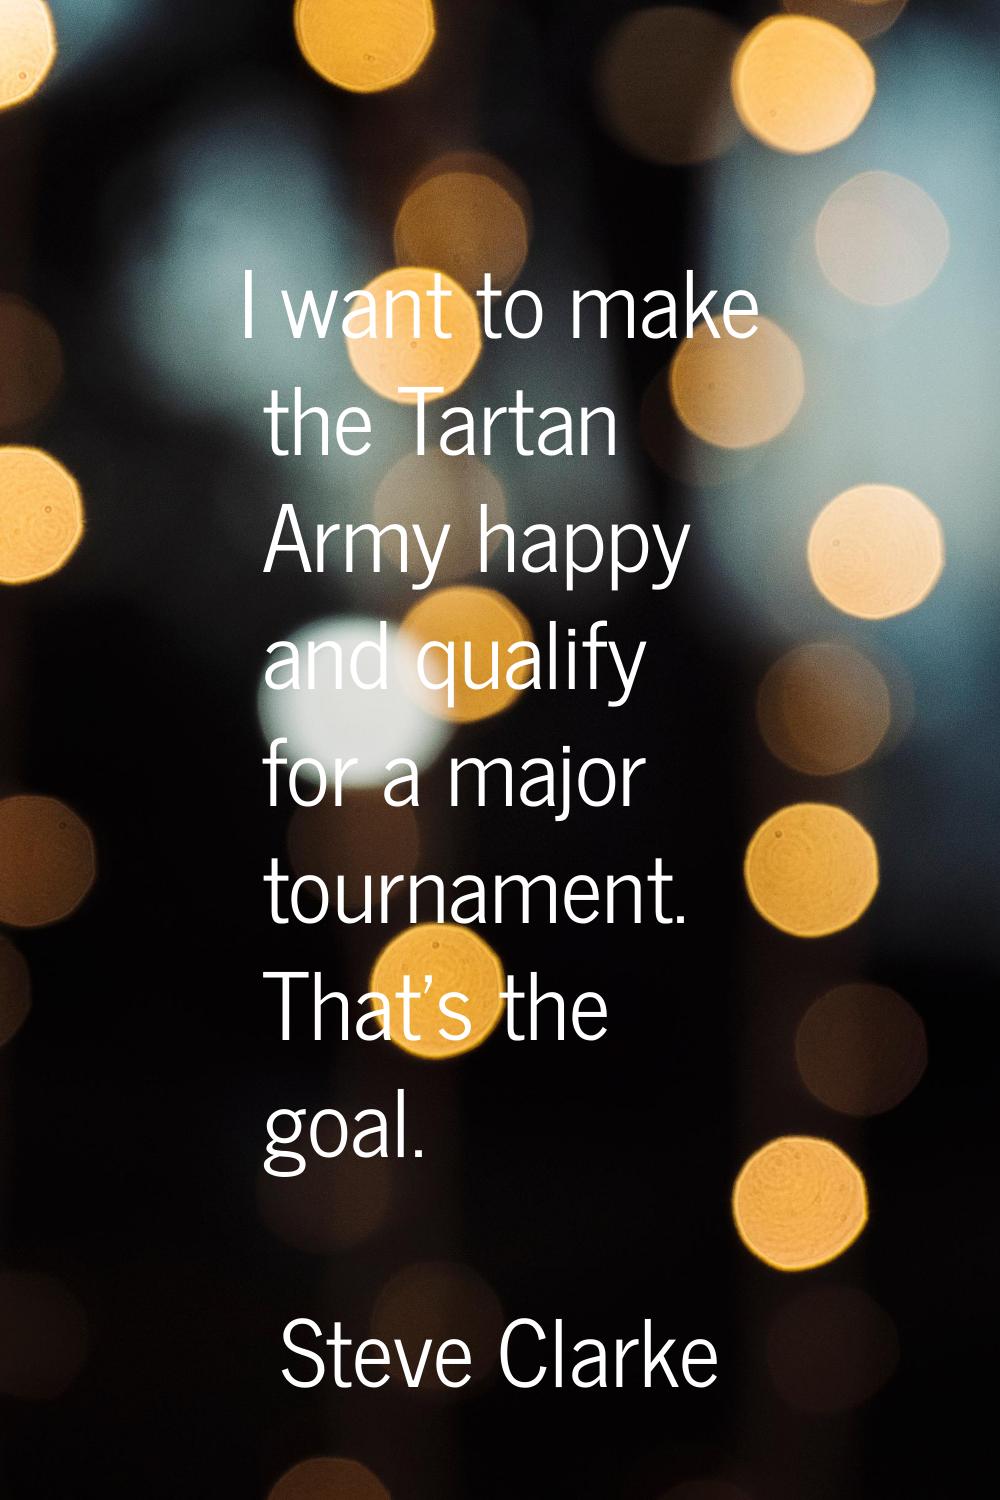 I want to make the Tartan Army happy and qualify for a major tournament. That's the goal.